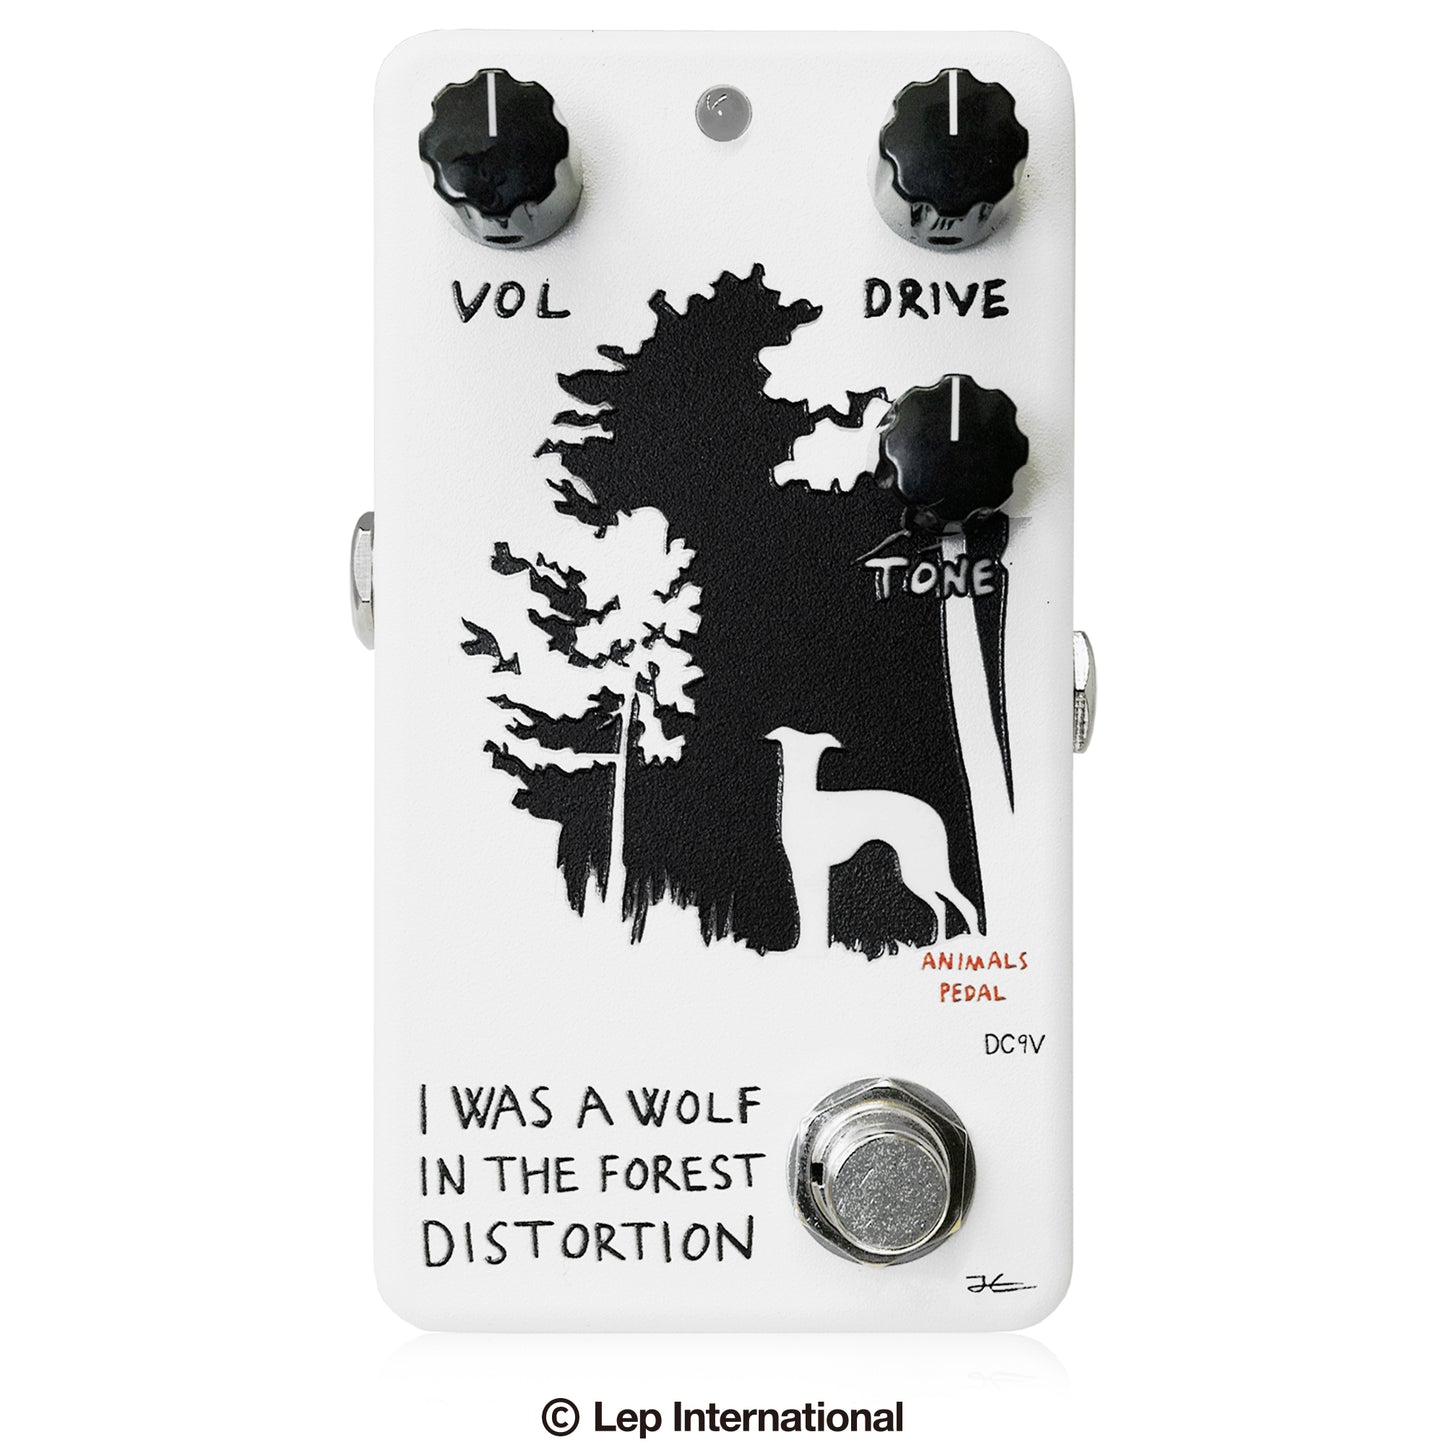 Animals Pedal I Was A Wolf In The Forest Distortion